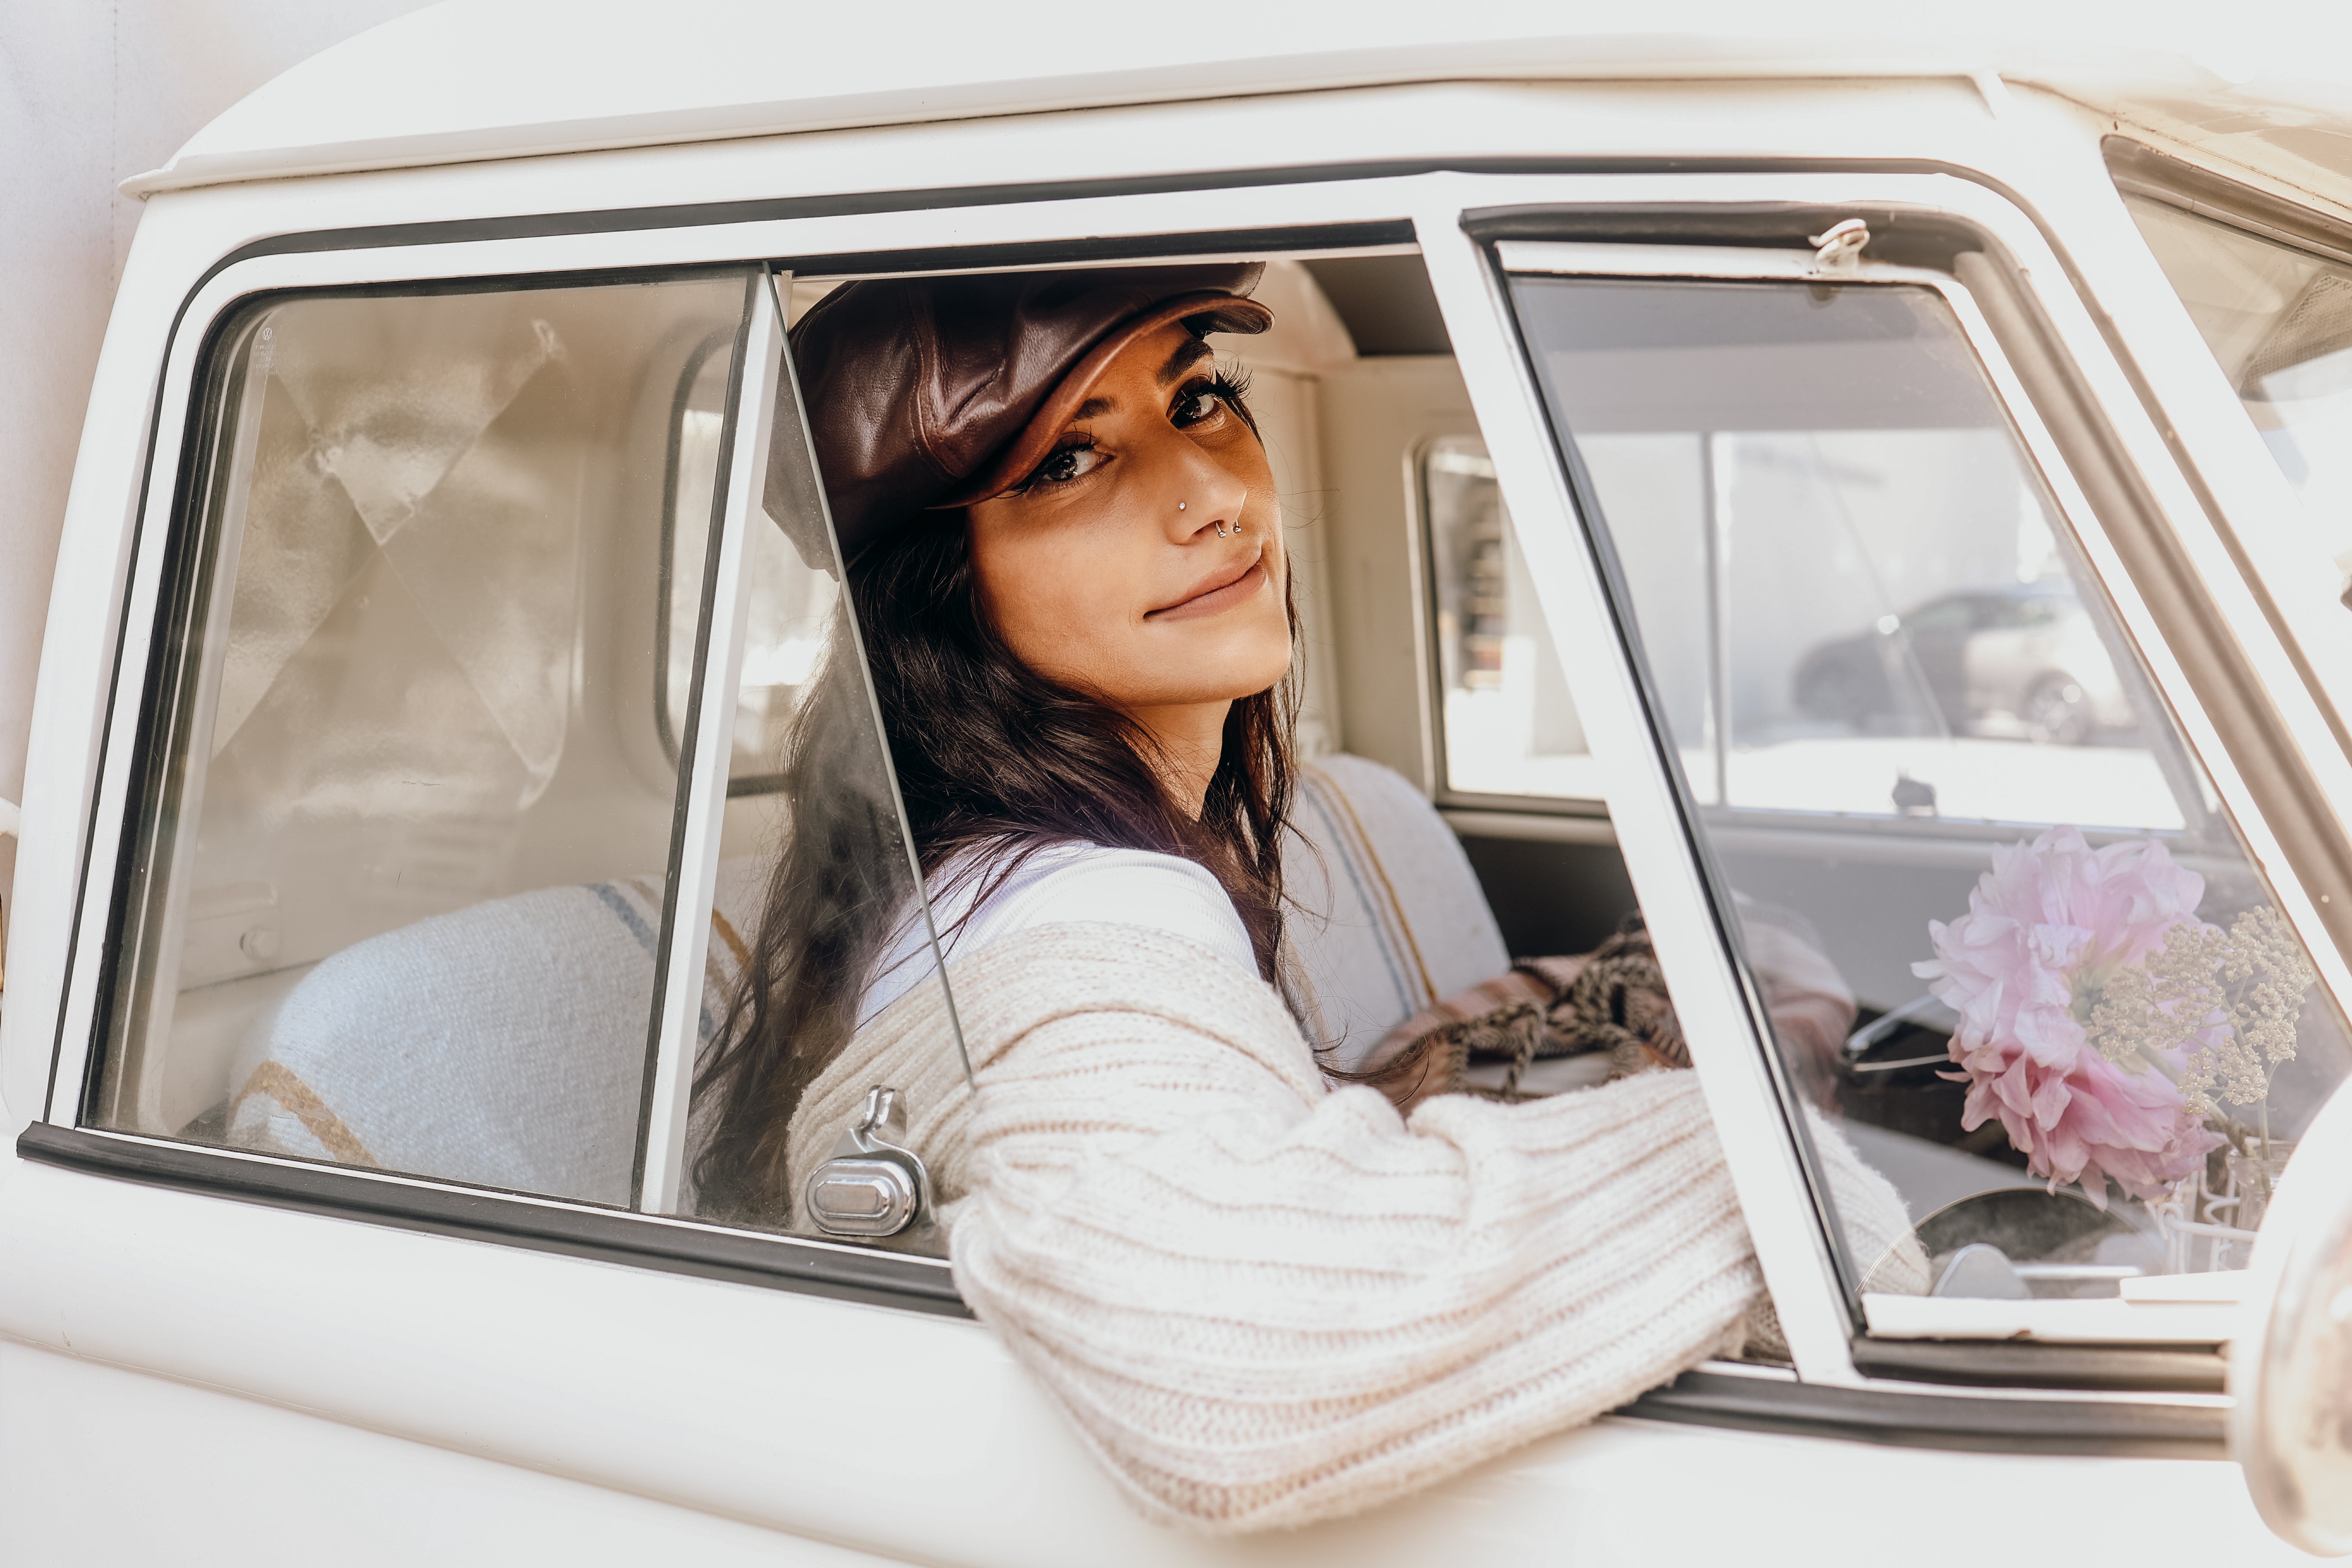 A young woman sitting inside a car wearing a leather cap